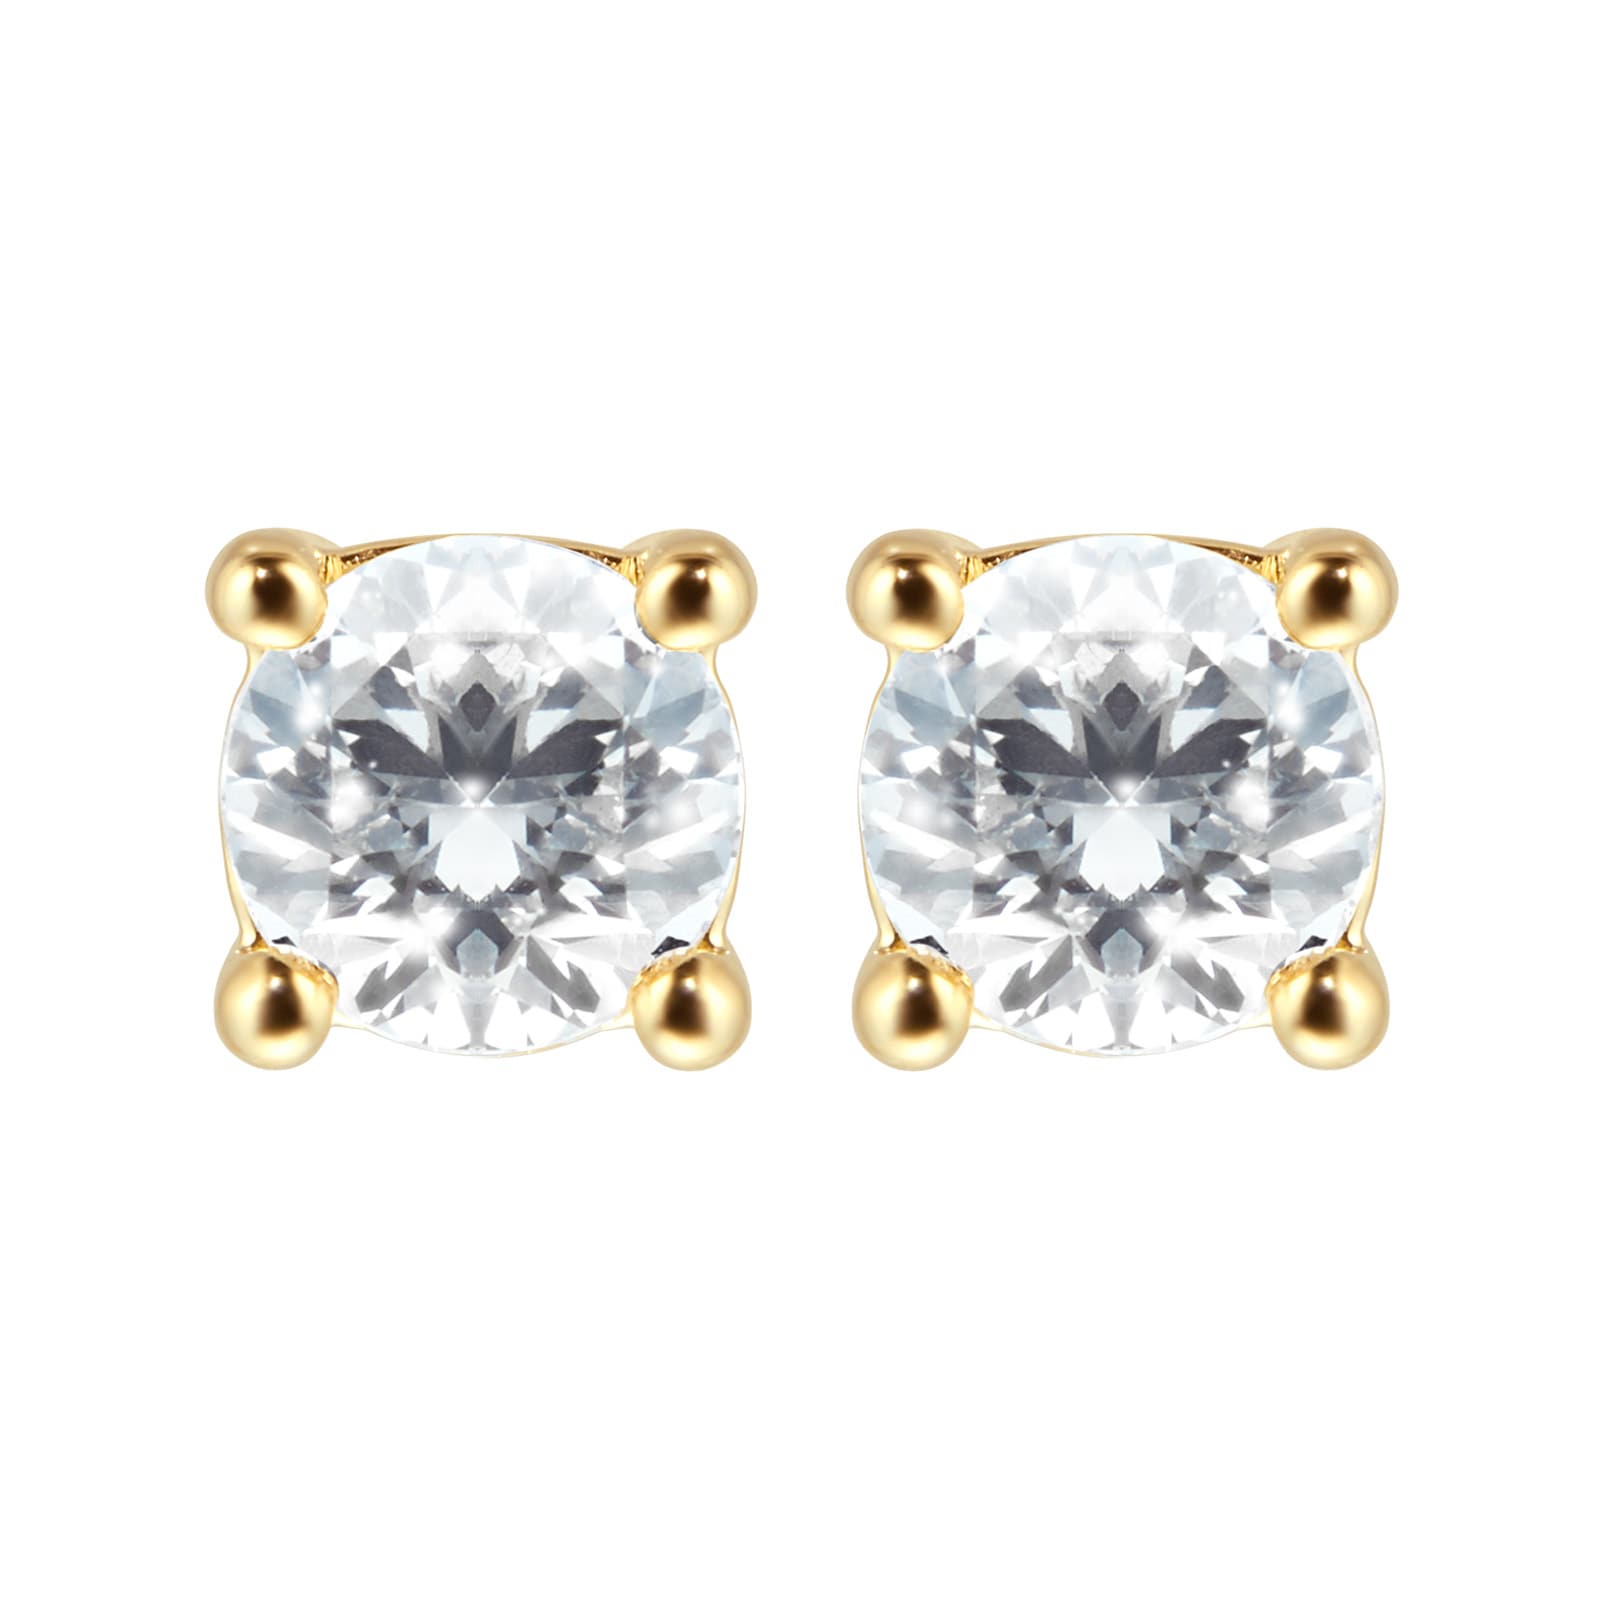 9ct Yellow Gold 0.40ct Goldsmiths Brightest Diamond 4 Claw Stud Earrings